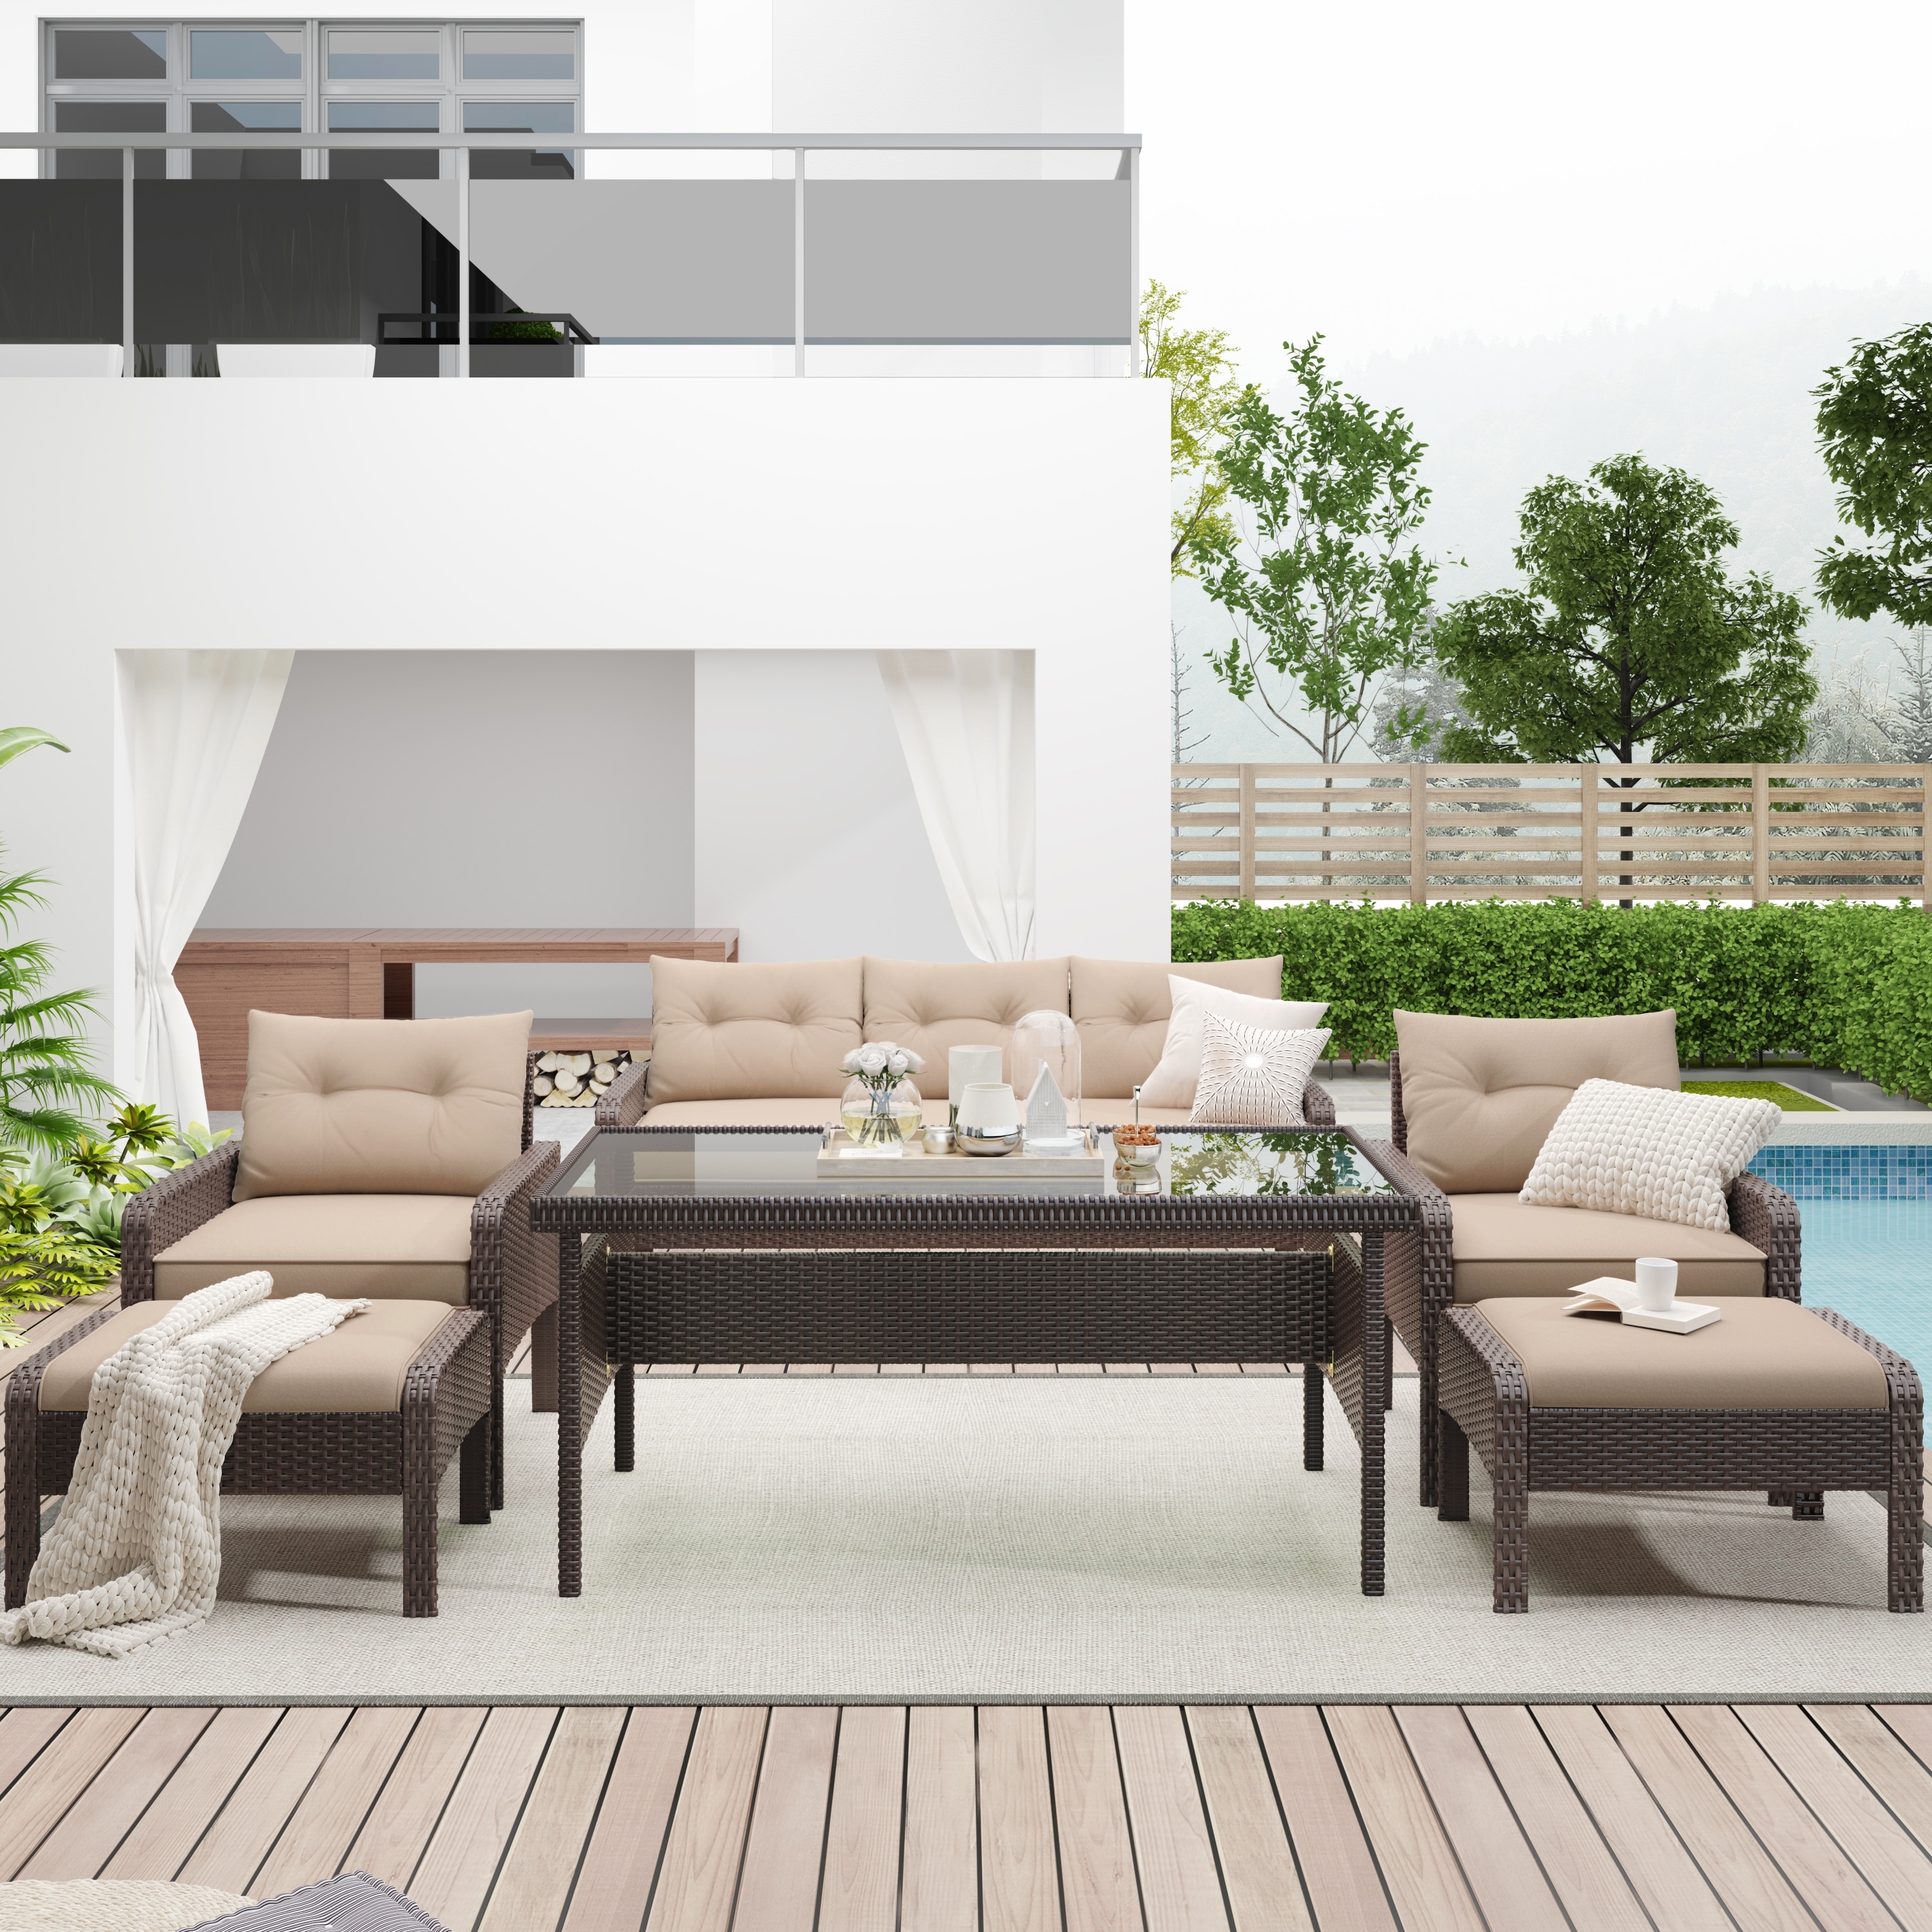 6-piece Outdoor Pe Rattan Sofa Set Dining Table Set With Tempered Glass Tea Table